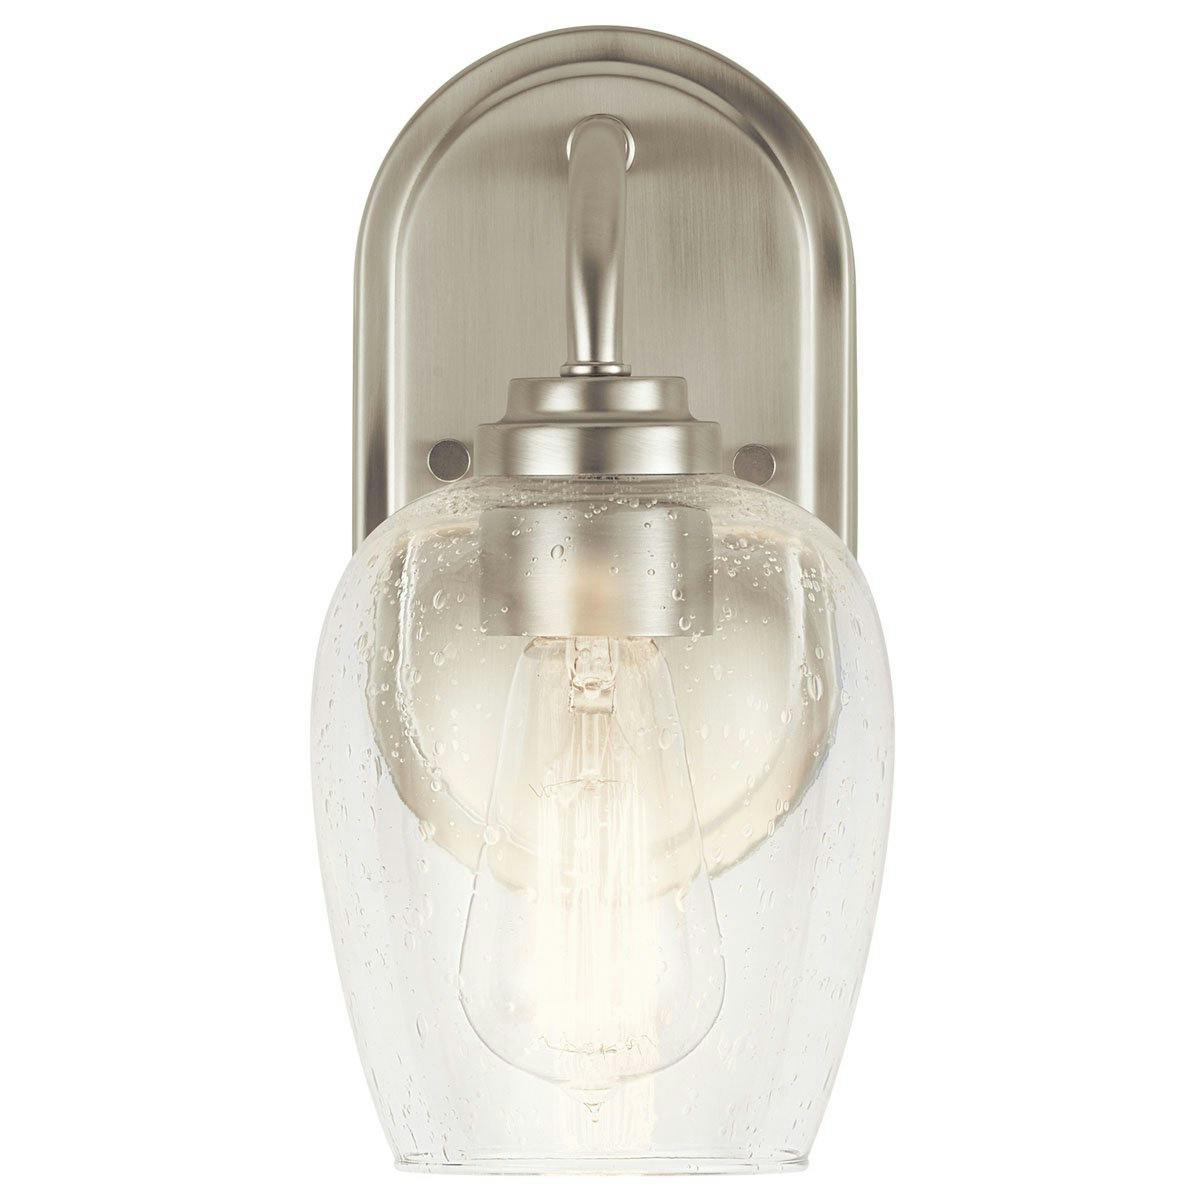 The Valserrano 10 inch Sconce 1 Light Nickel facing down on a white background